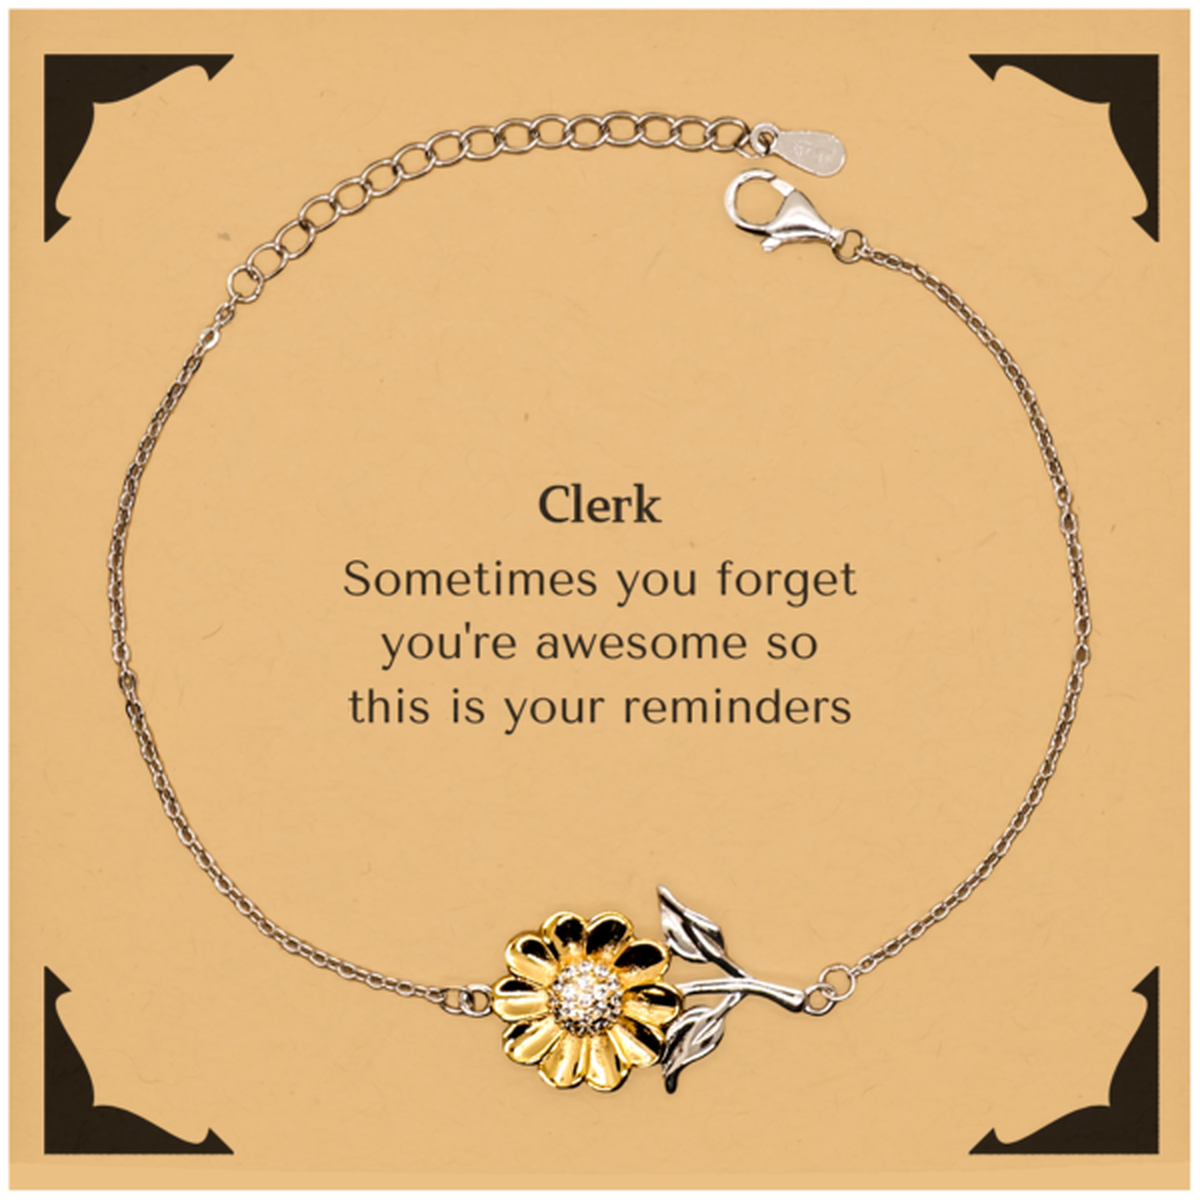 Sentimental Clerk Sunflower Bracelet, Clerk Sometimes you forget you're awesome so this is your reminders, Graduation Christmas Birthday Gifts for Clerk, Men, Women, Coworkers